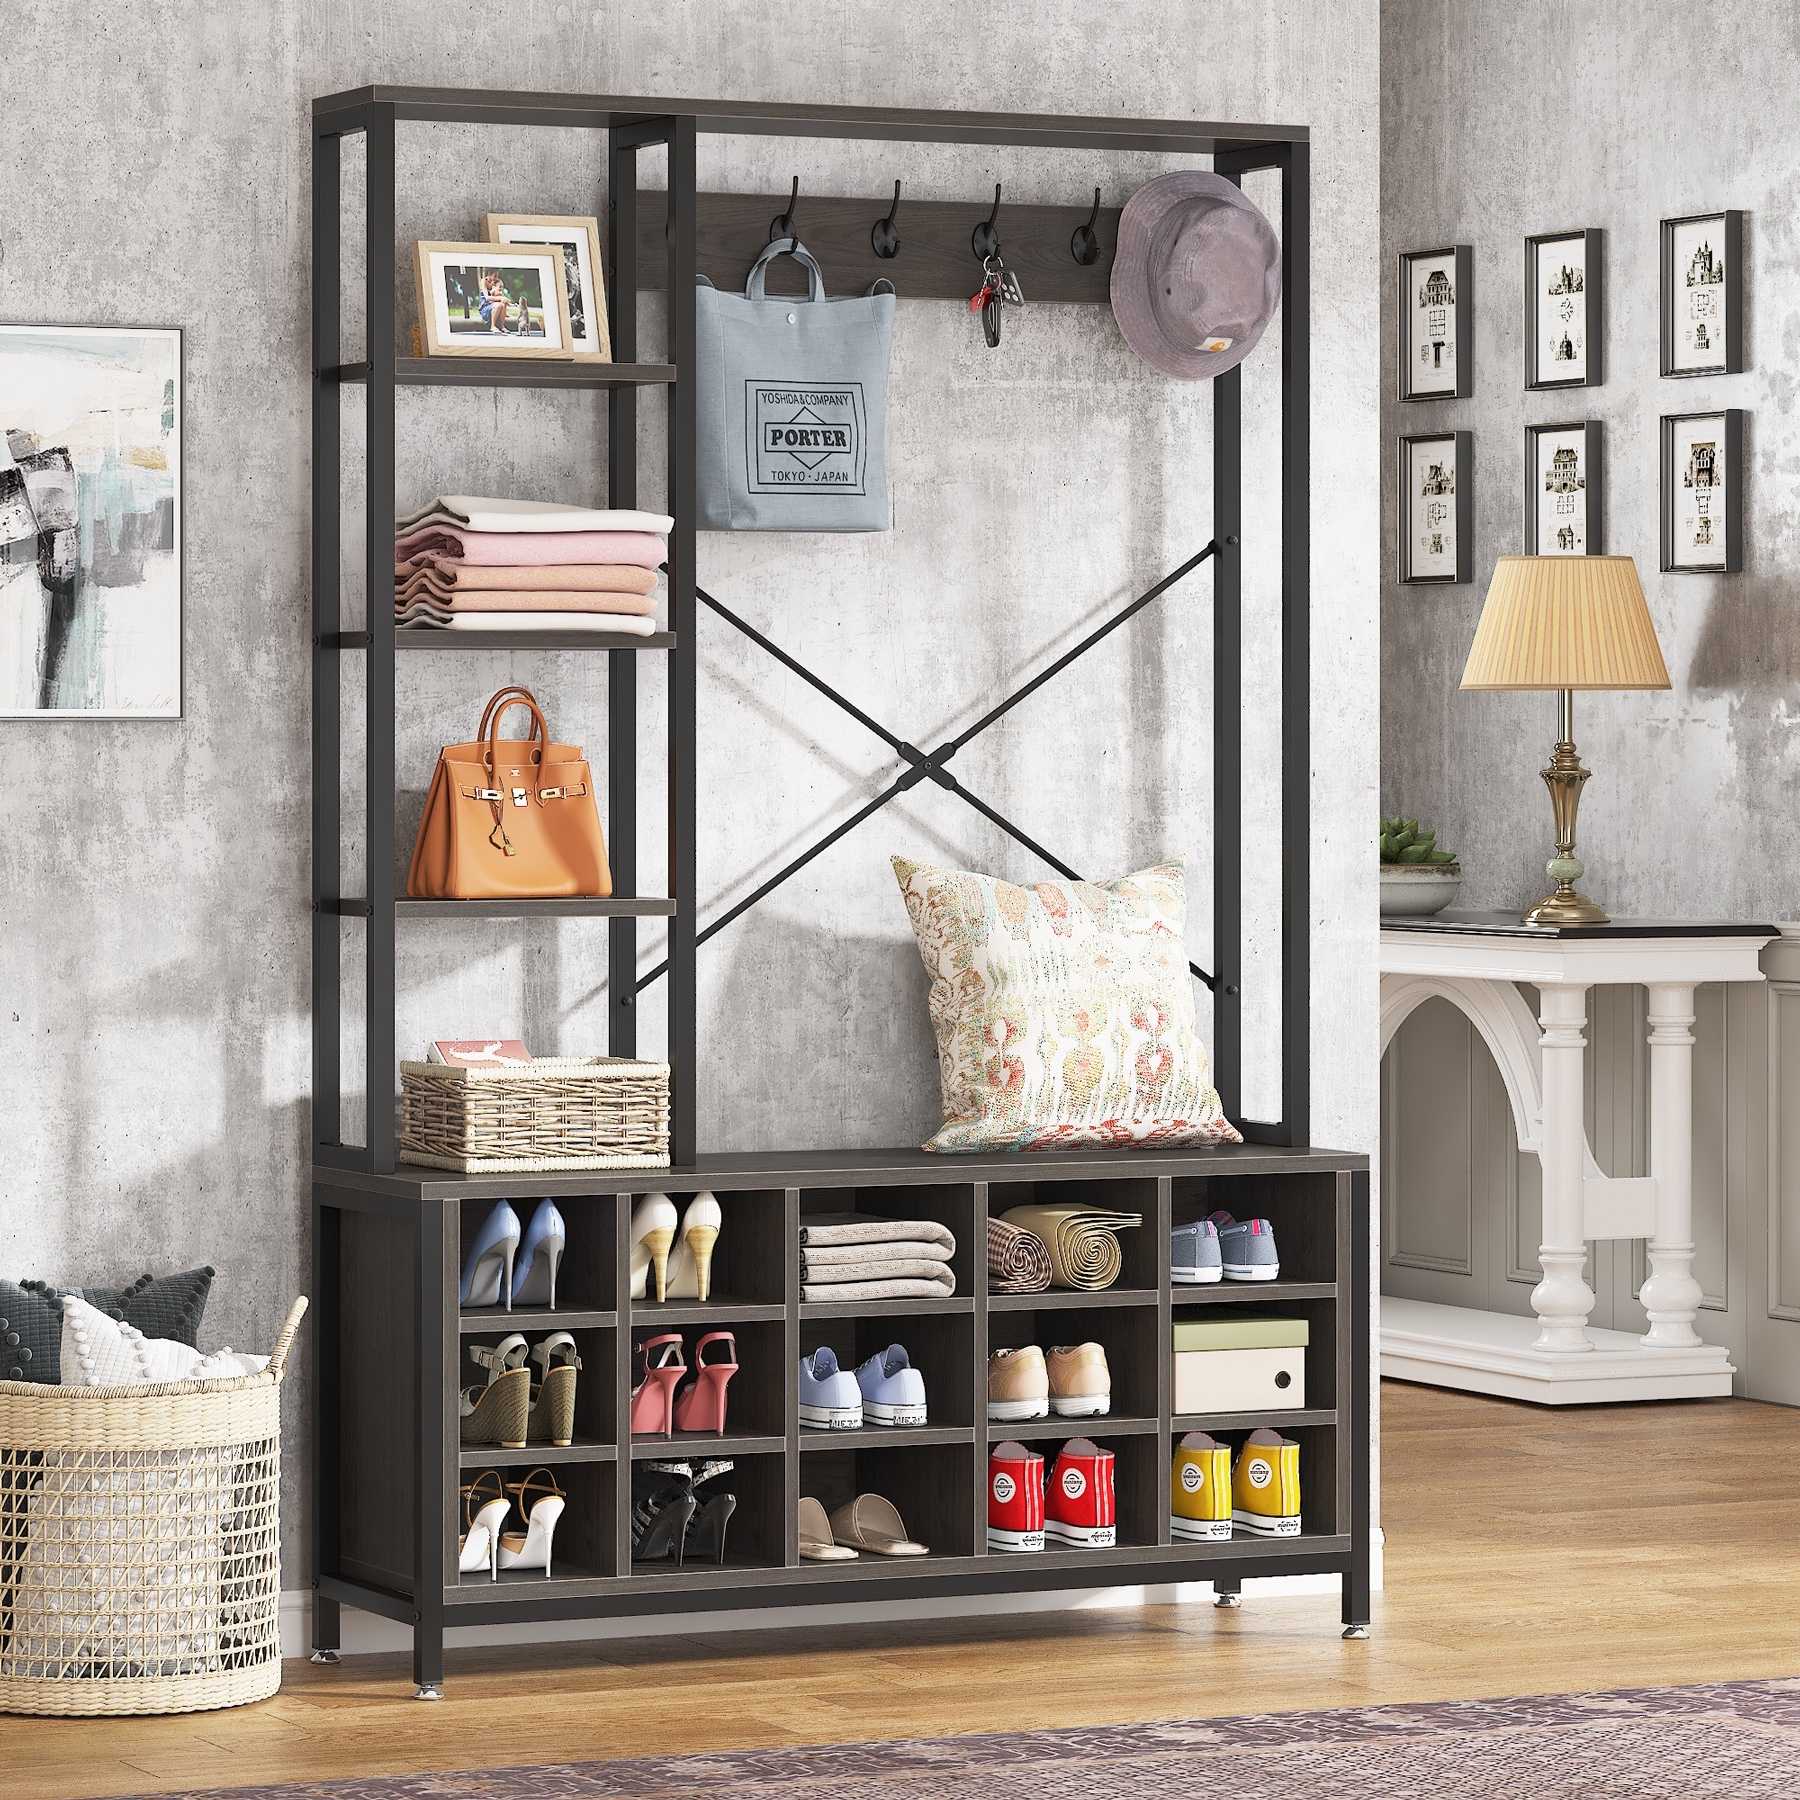 https://ak1.ostkcdn.com/images/products/is/images/direct/c13758d95d369eeffaf72eded1cd4c01a9fb8a0d/Entryway-Hall-Tree-with-Bench-and-Shoe-Storage-Coat-Rack.jpg